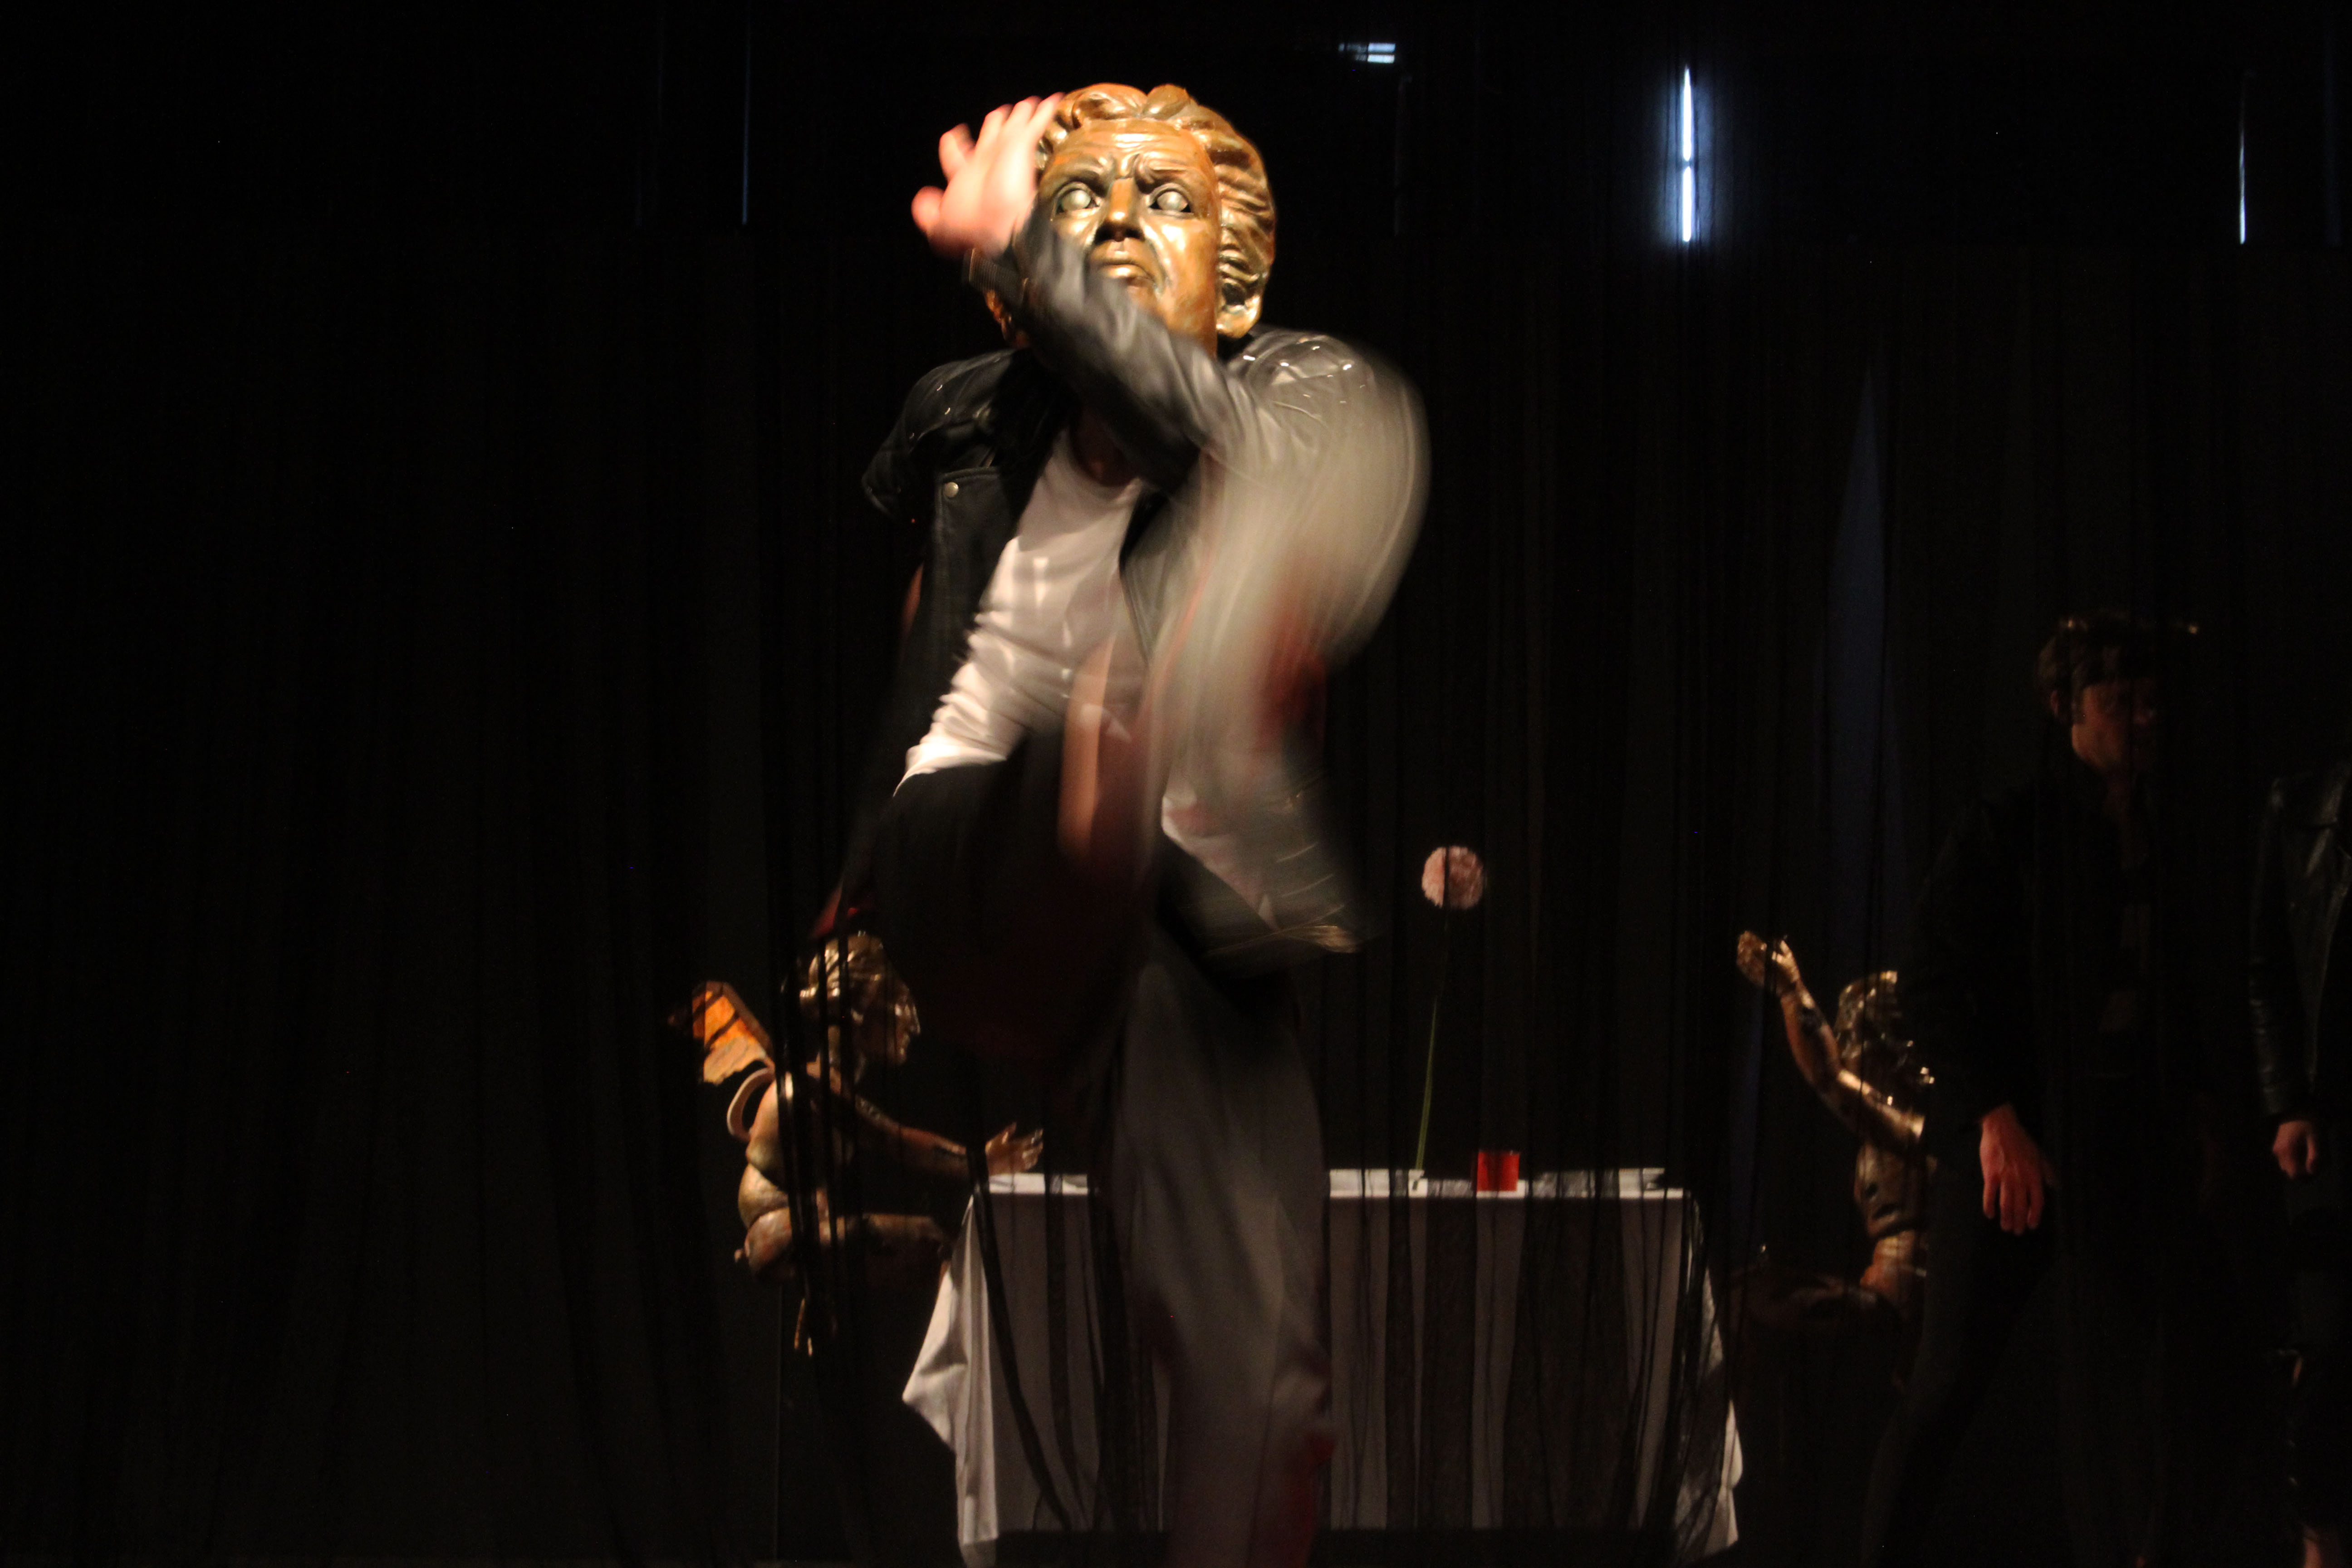 A man with an antique golden face mask steps towards the camera. His movements are blurred.